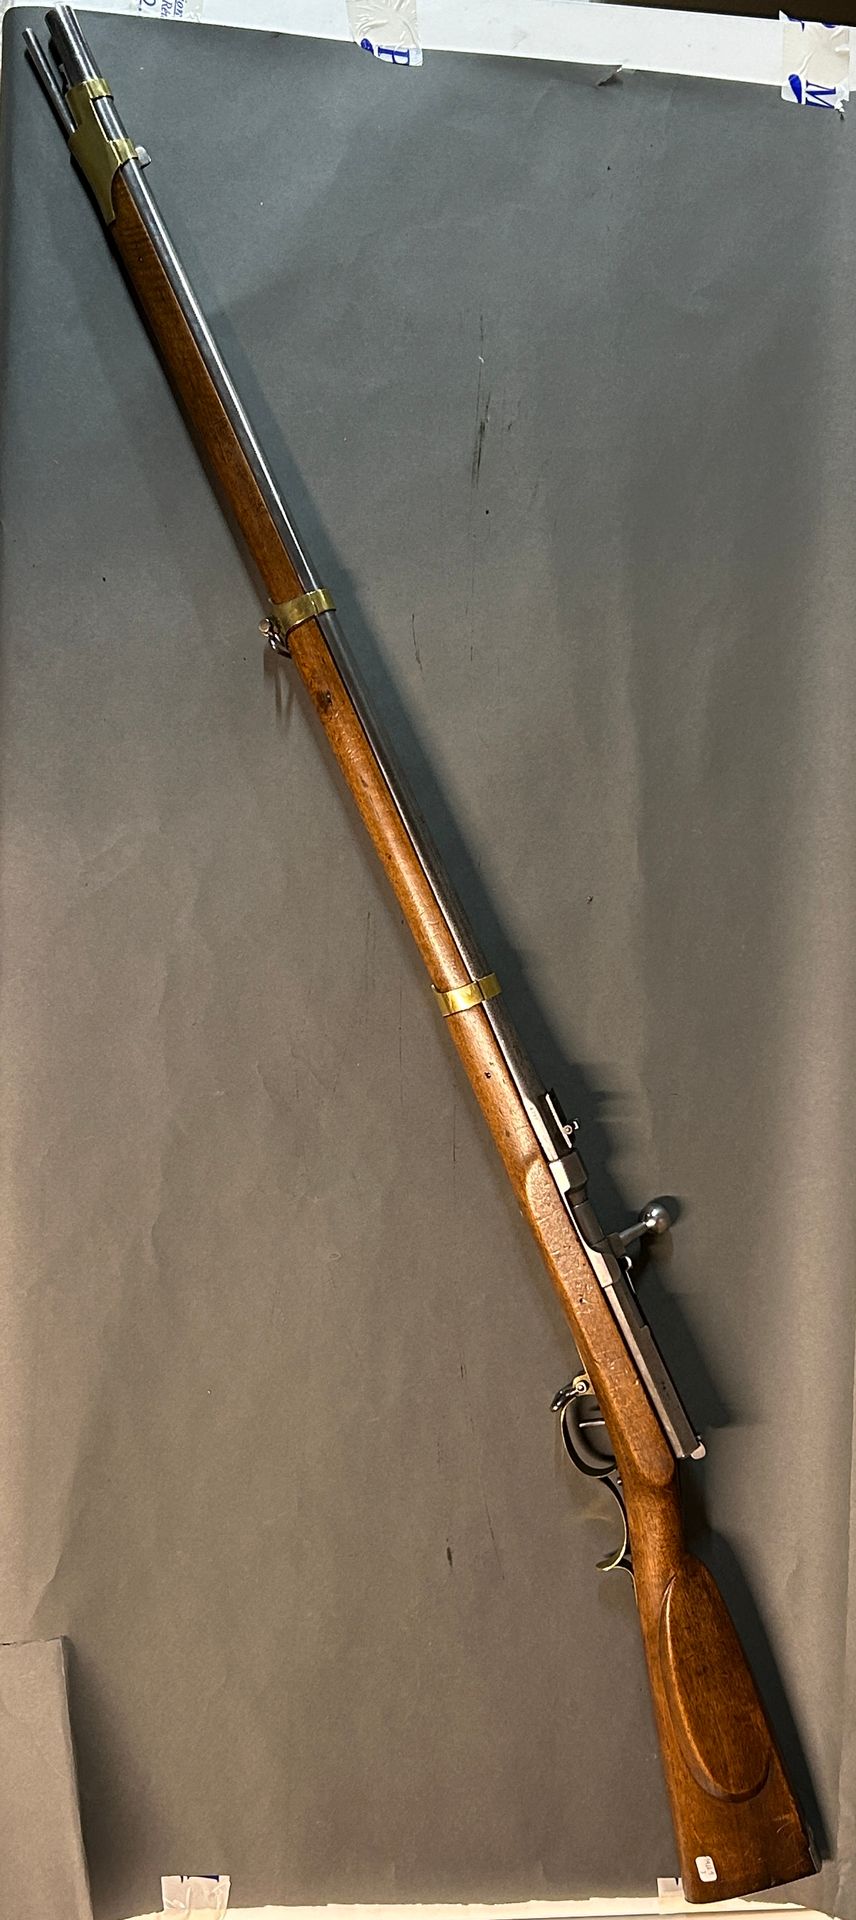 Null Dreyse rifle.

One shot for paper cartridges with loading by the breech.

R&hellip;